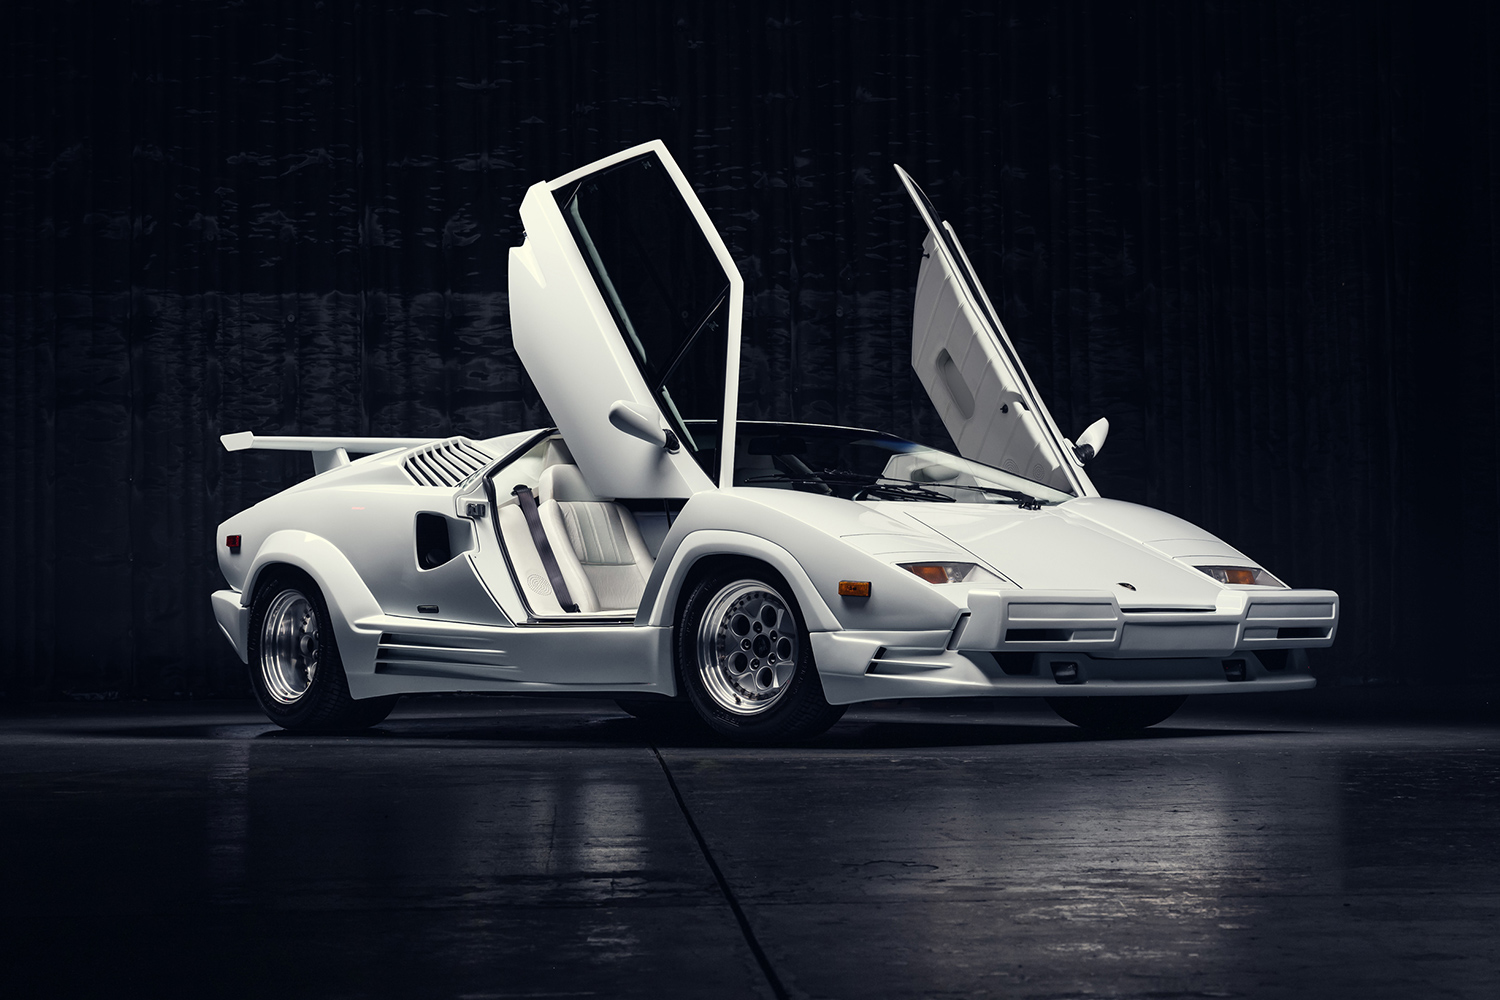 1989 Lamborghini Countach 25th Anniversary Edition used in The Wolf of Wall Street heading to auction at RM Sotheby's